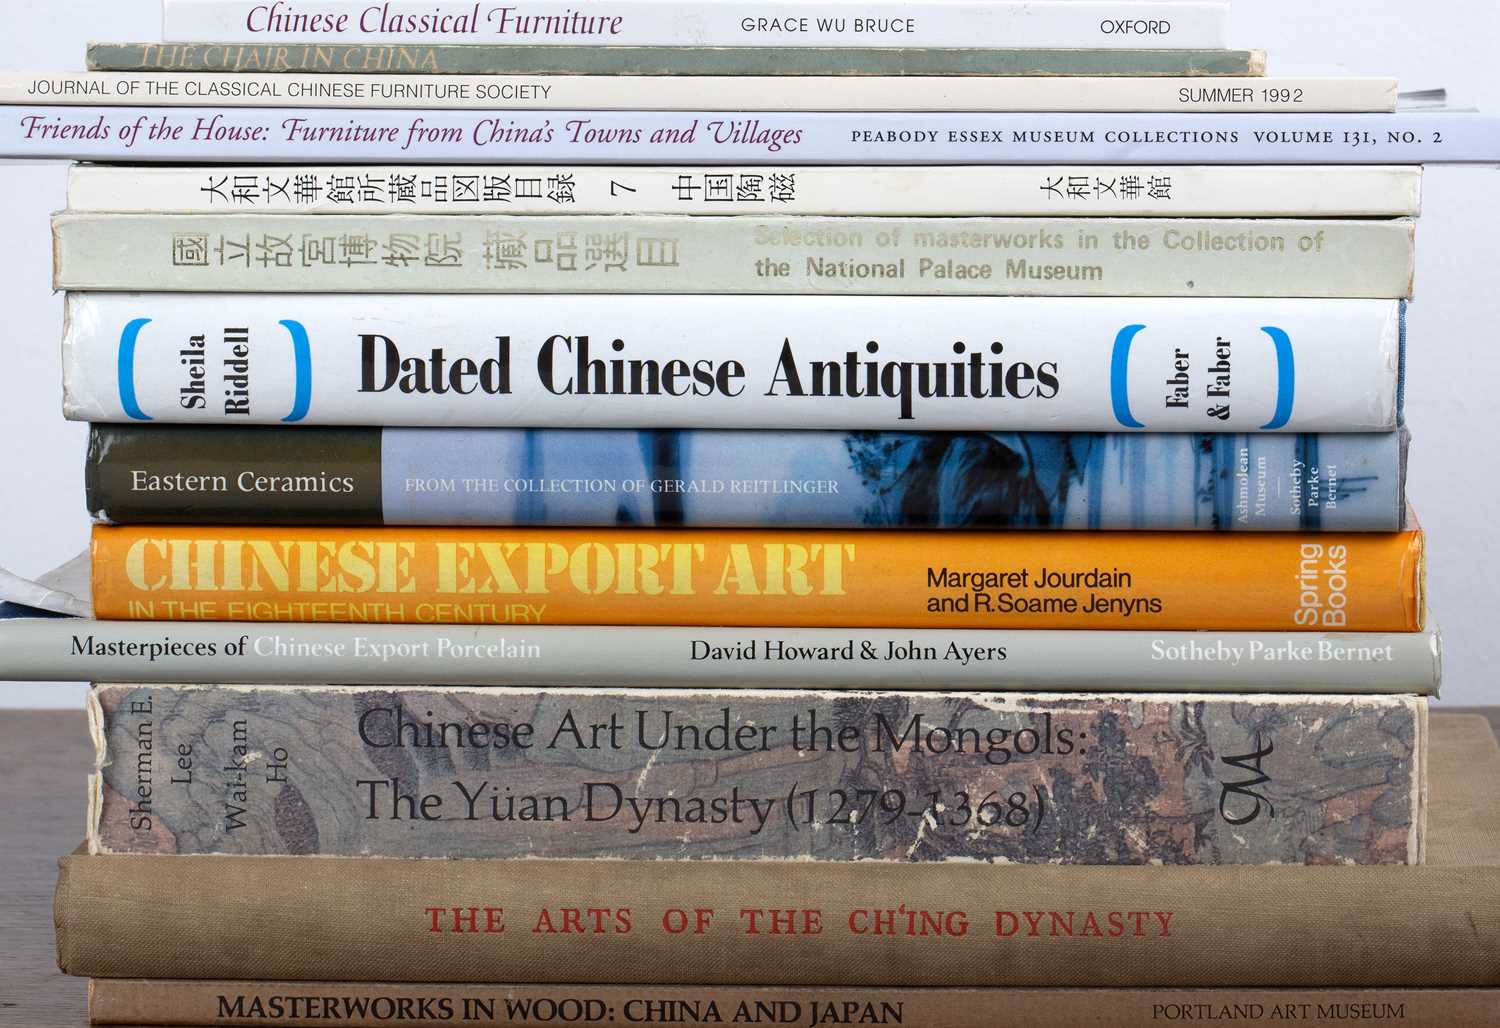 Collection of books/catalogues on Asian Art and Furniture to include Friends of the House, Furniture